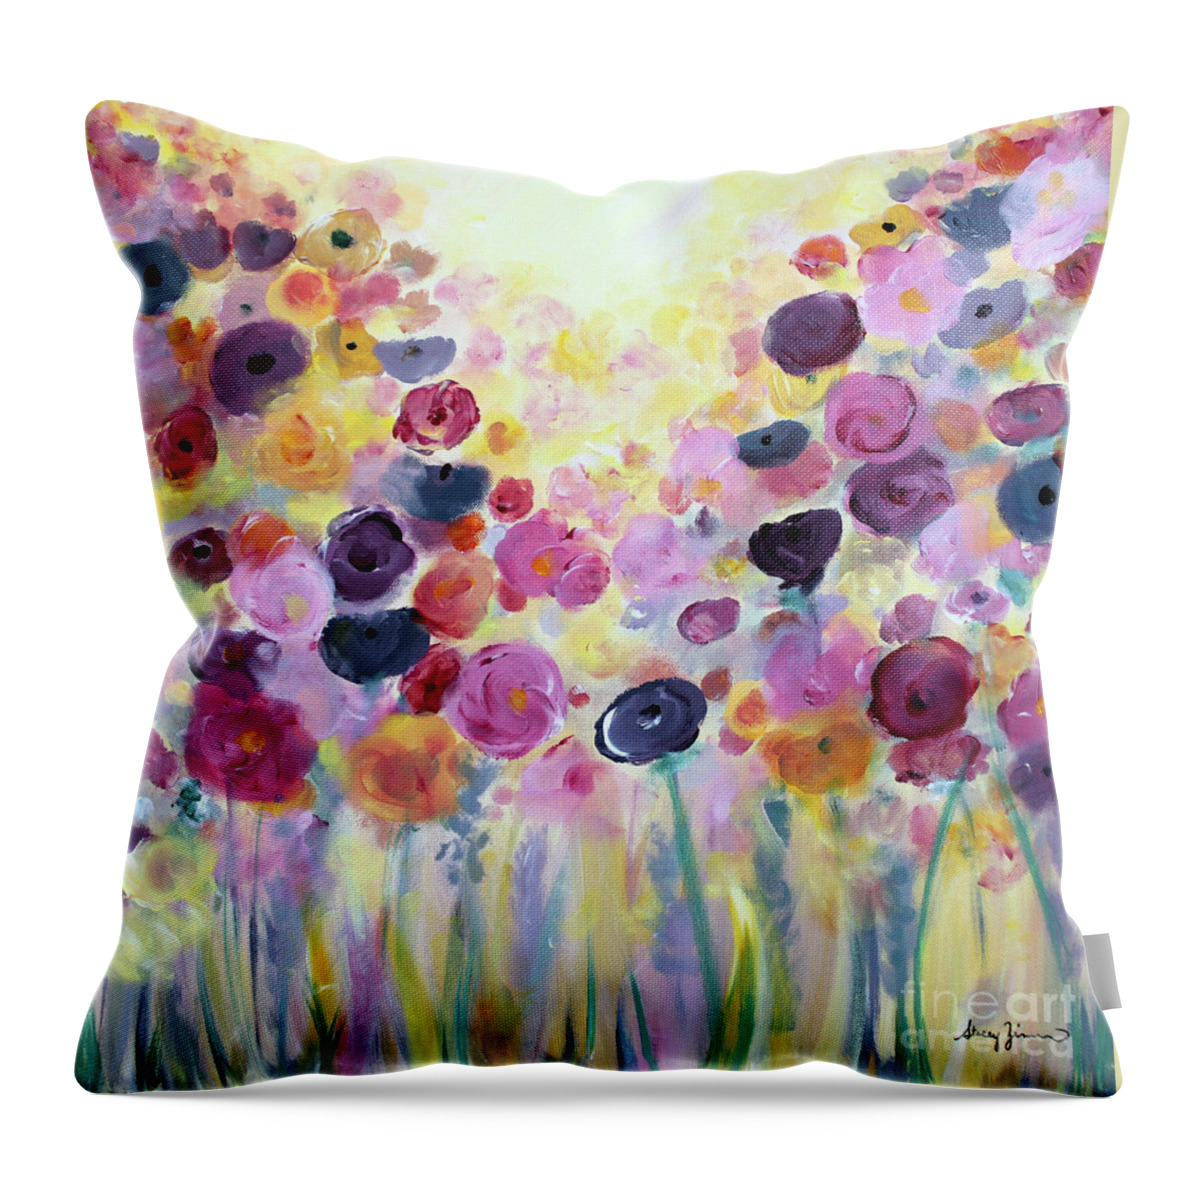 Floral Throw Pillow featuring the painting Floral Splendor III by Stacey Zimmerman